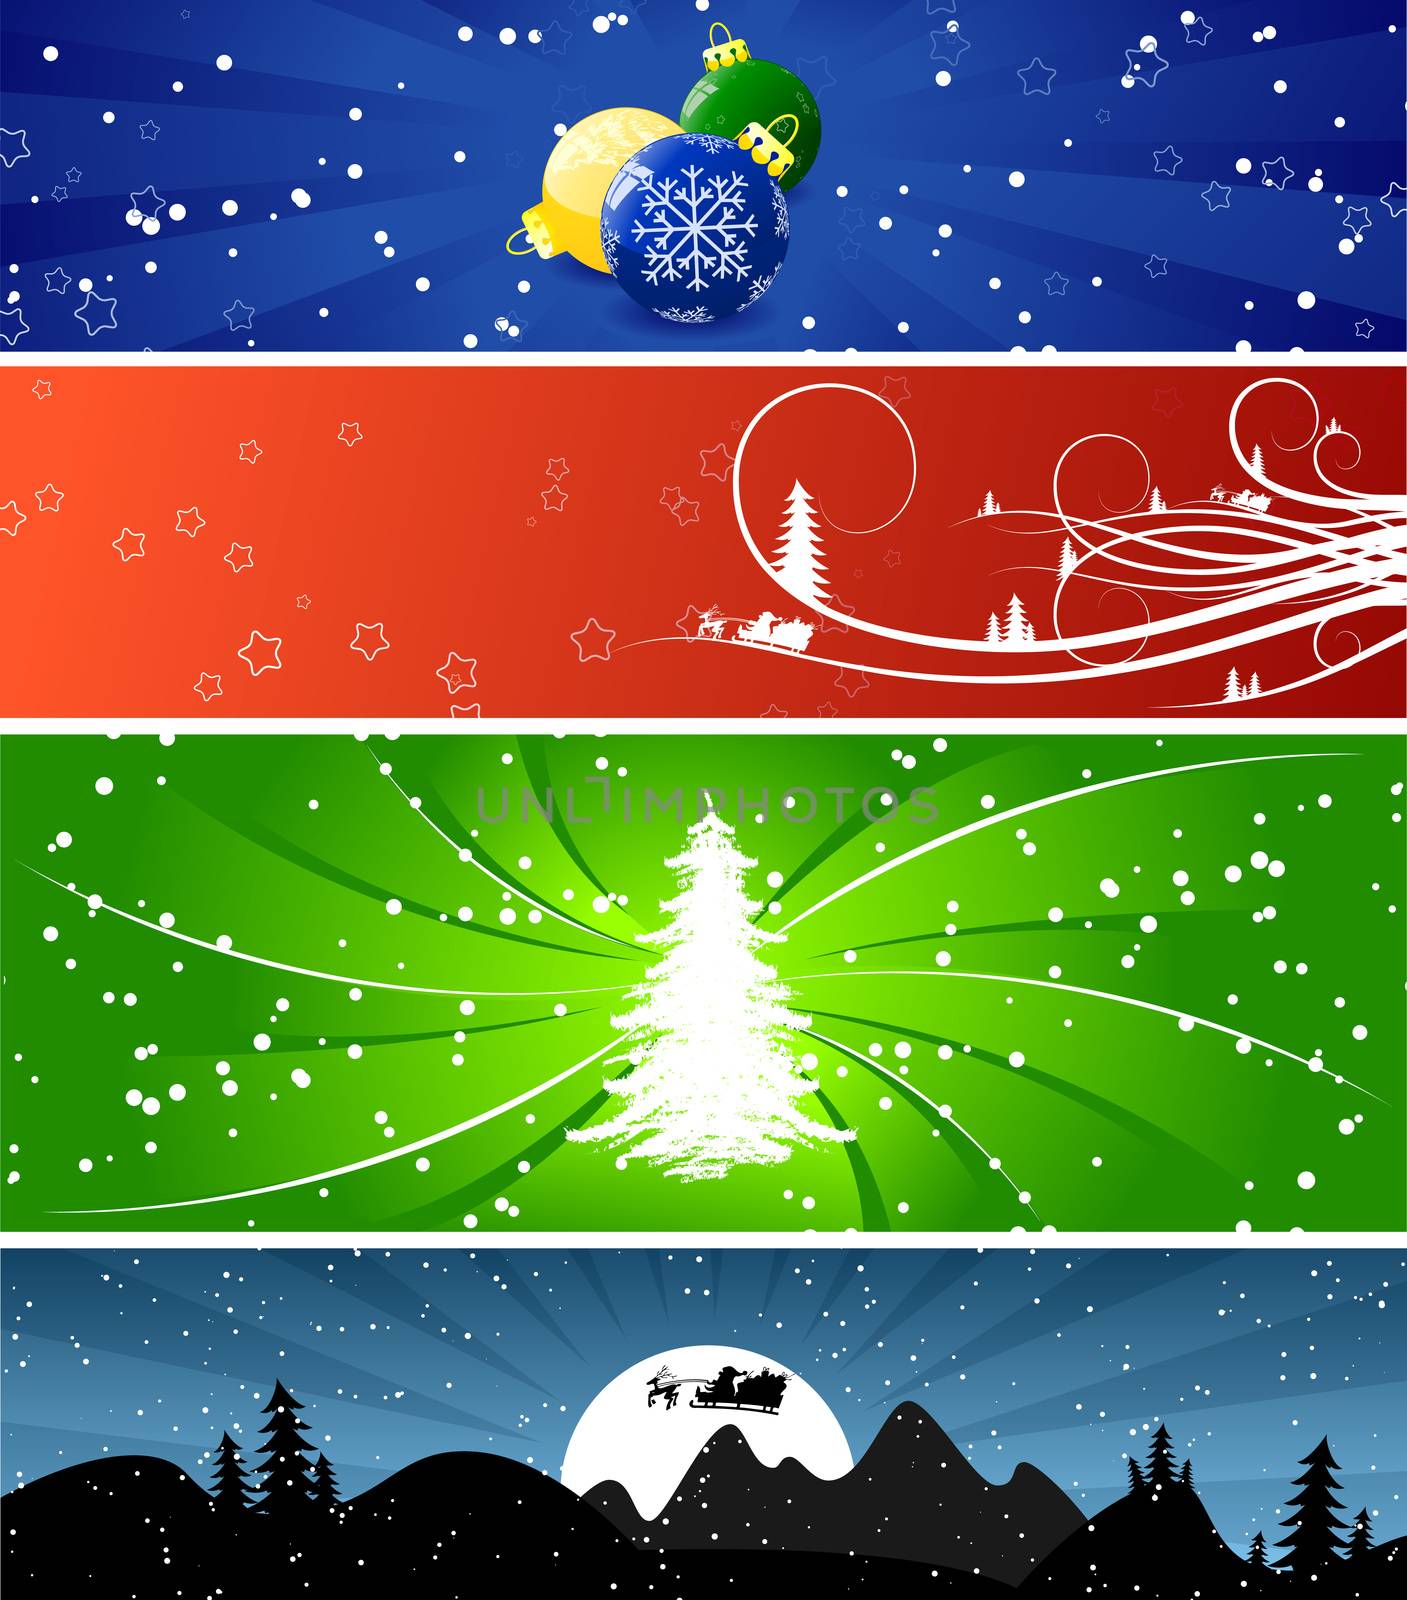 Winter Christmsa banners by WaD